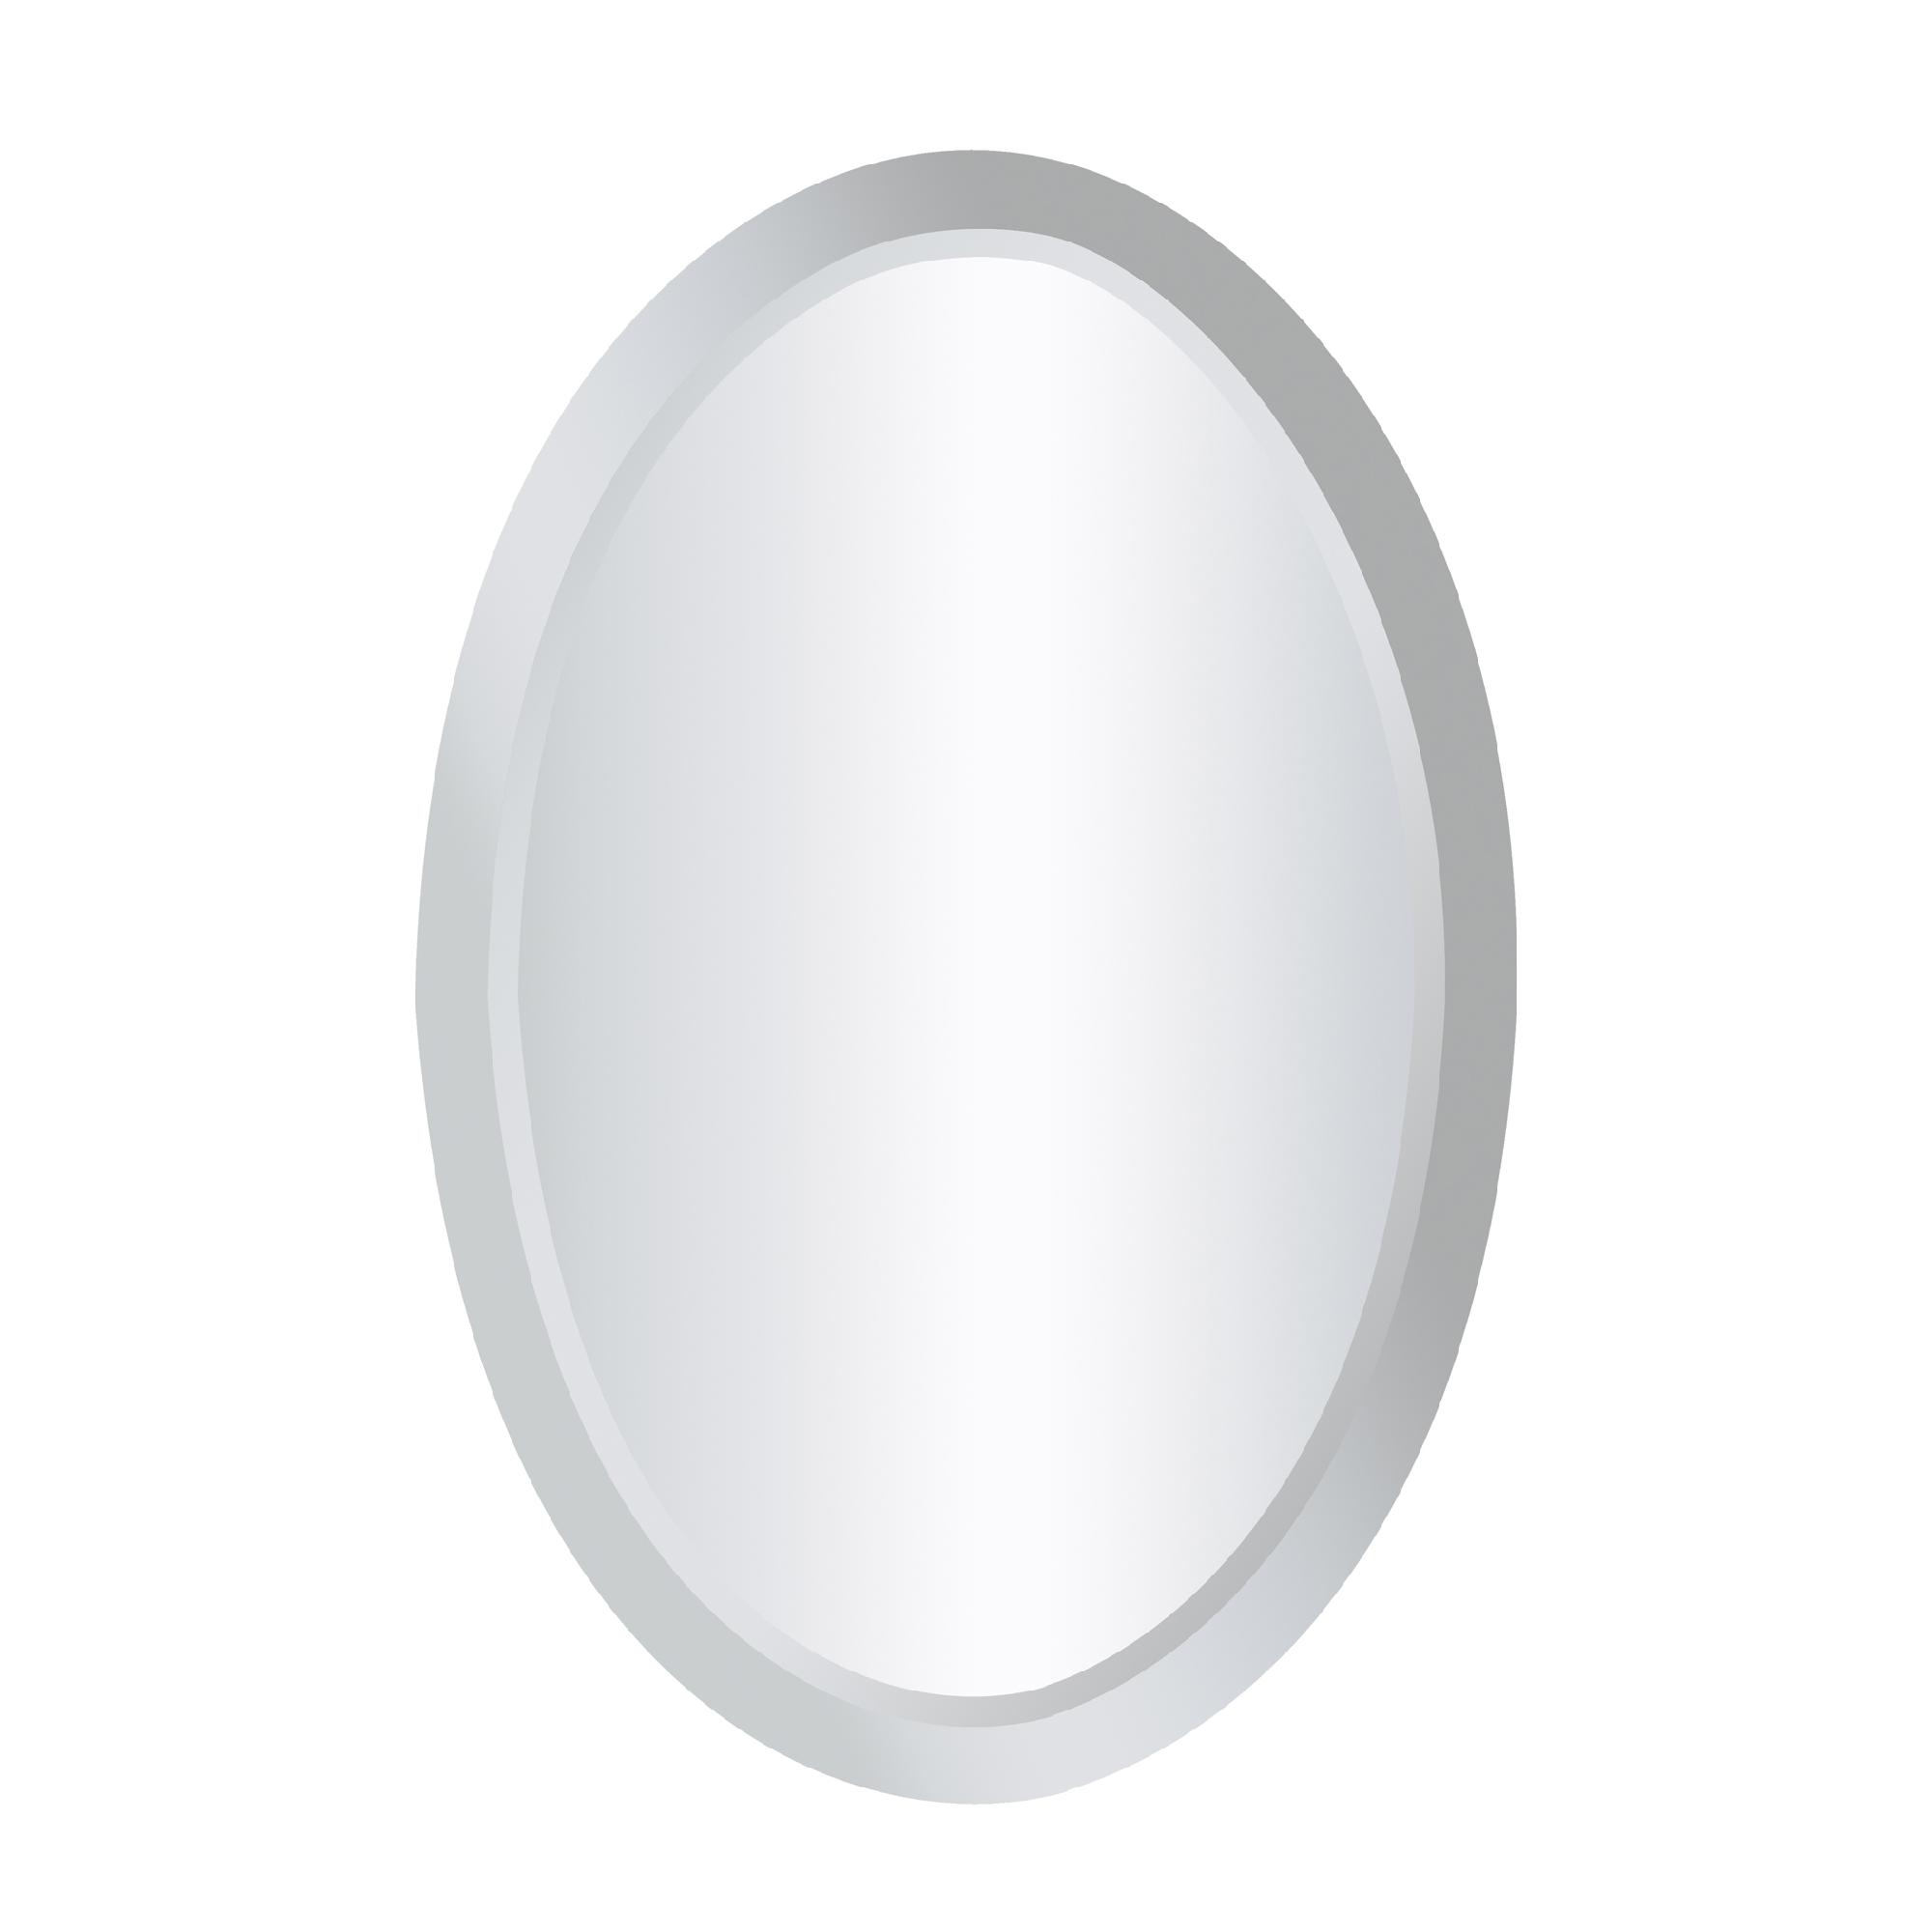 Sterling Industries Chardron In Clear Finish Mirror